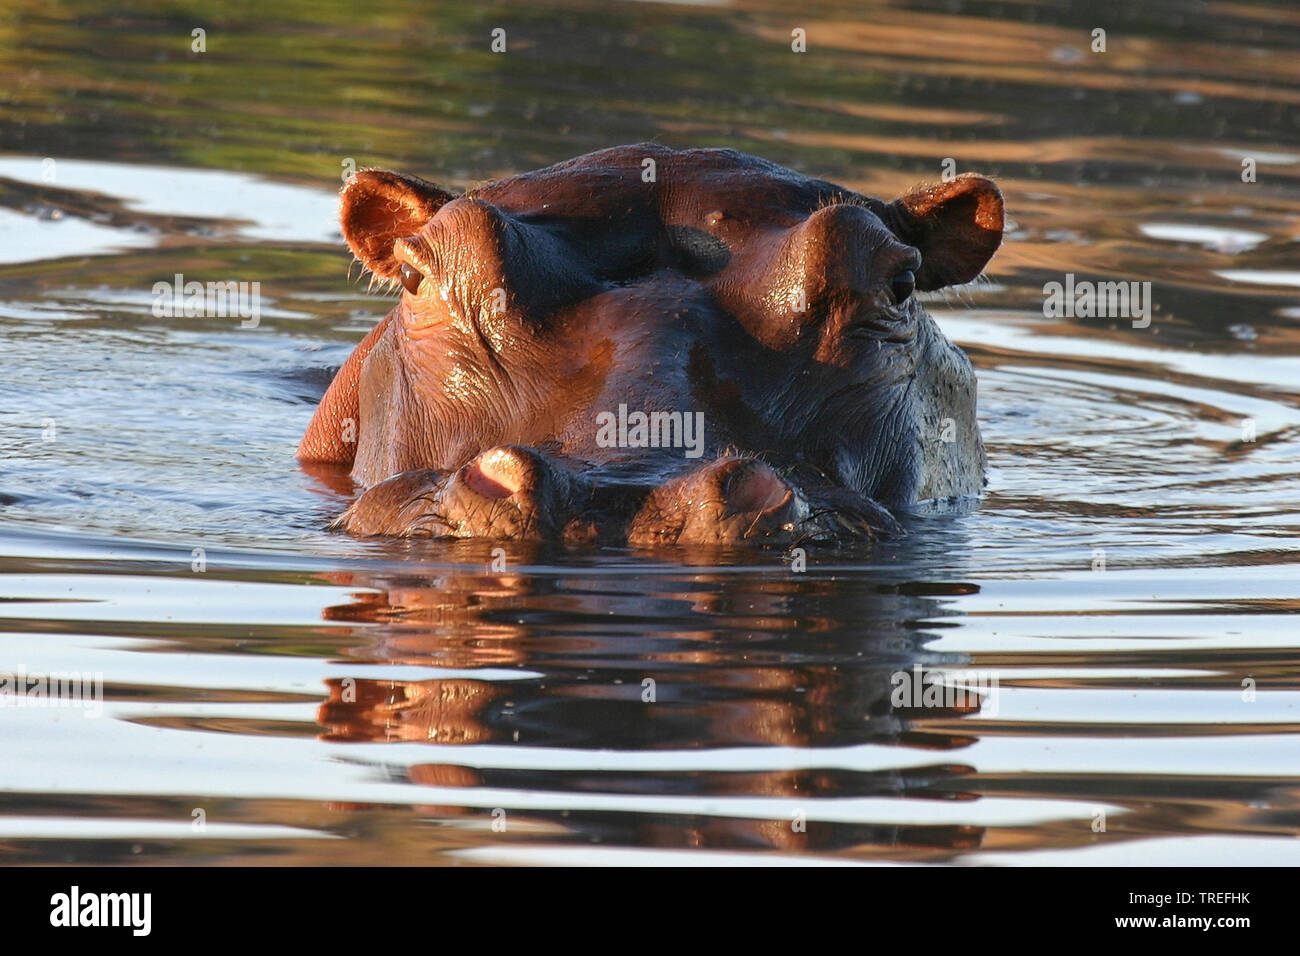 hippopotamus, hippo, Common hippopotamus (Hippopotamus amphibius), looking out the water, portrait, South Africa Stock Photo